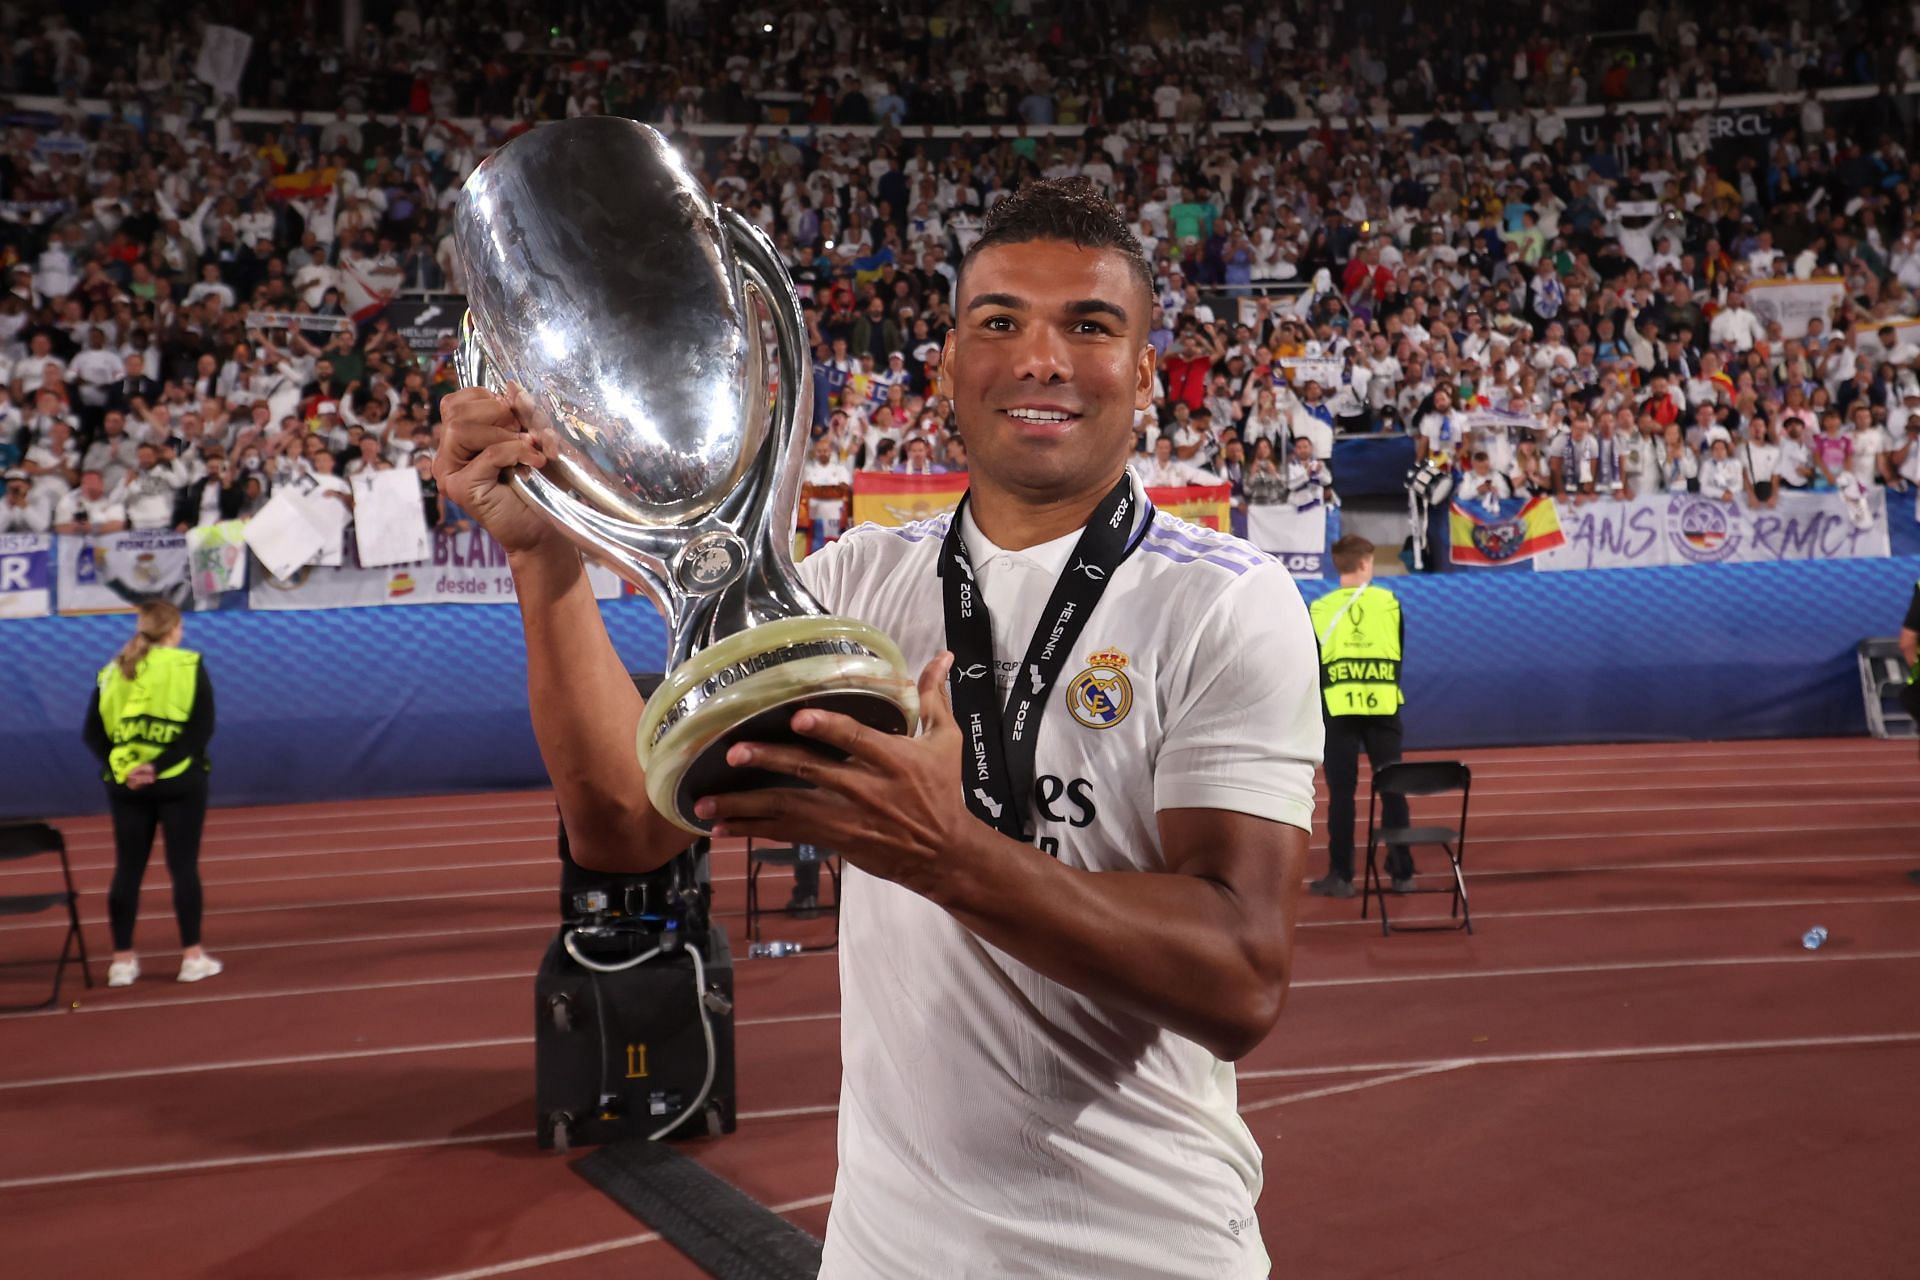 Casemiro left Real Madrid to arrive at Old Trafford this summer.